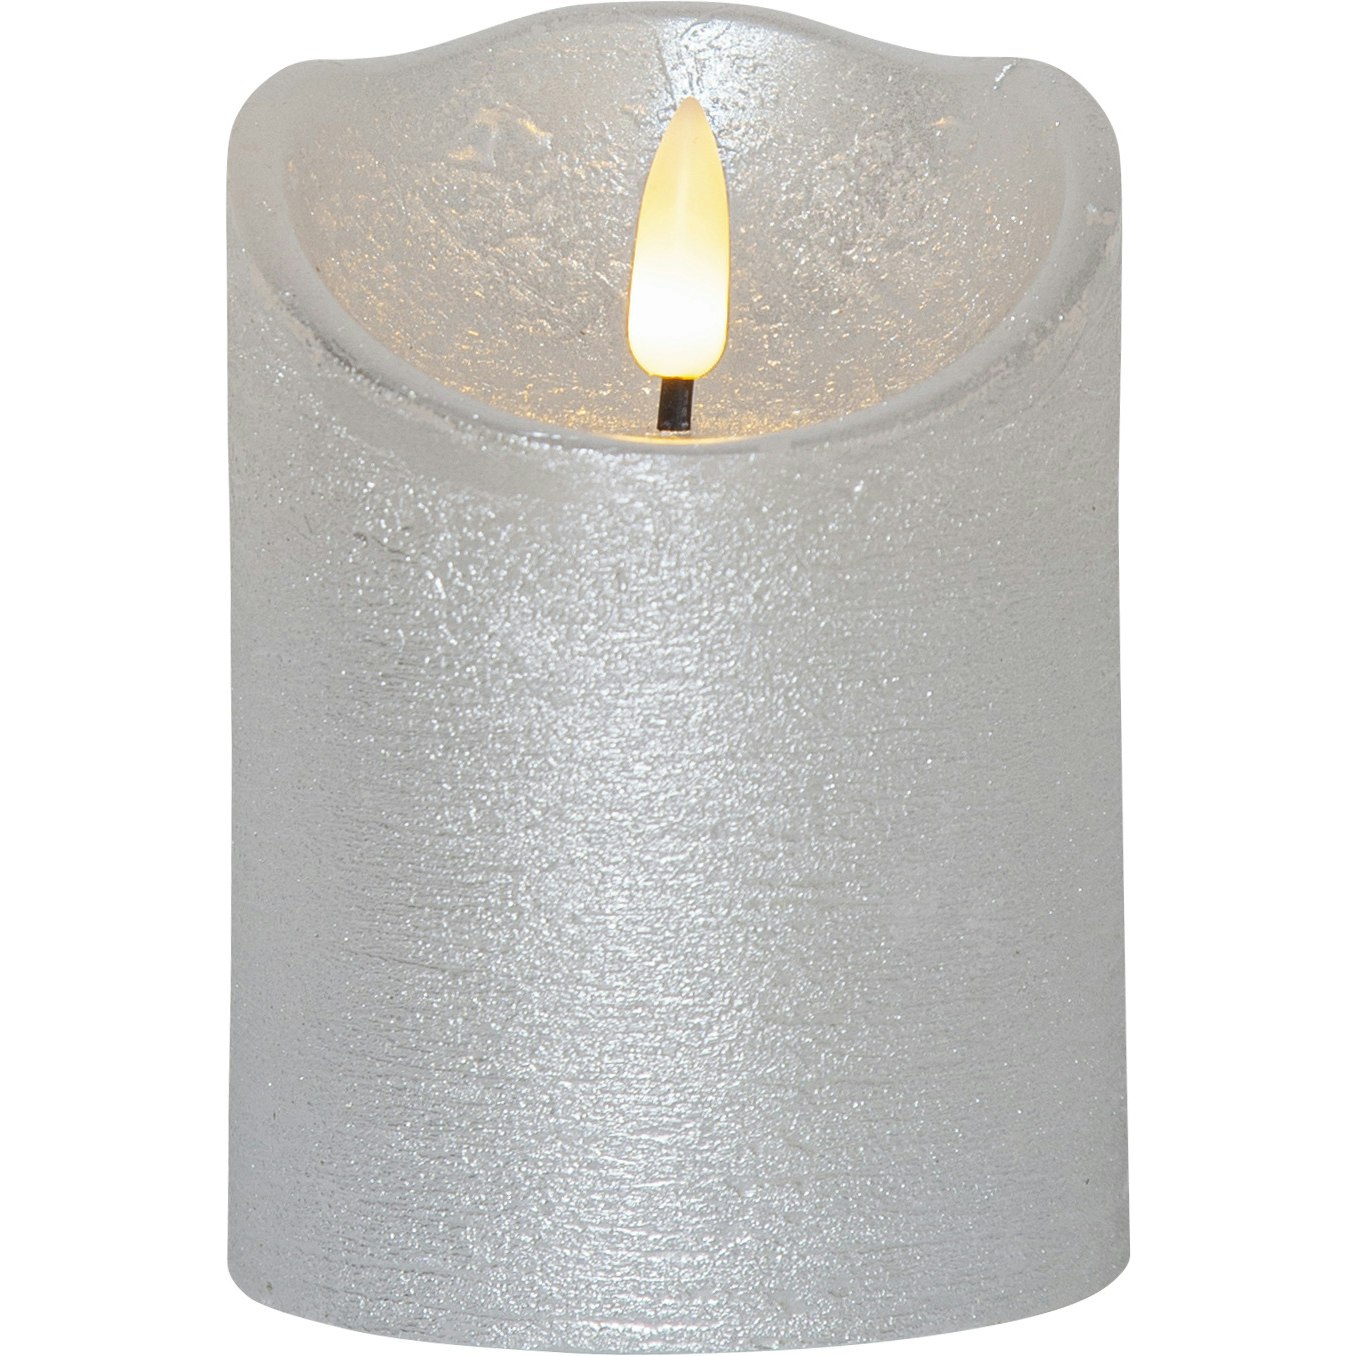 Flamme Rustic LED Kubbelys Silver, 10 cm